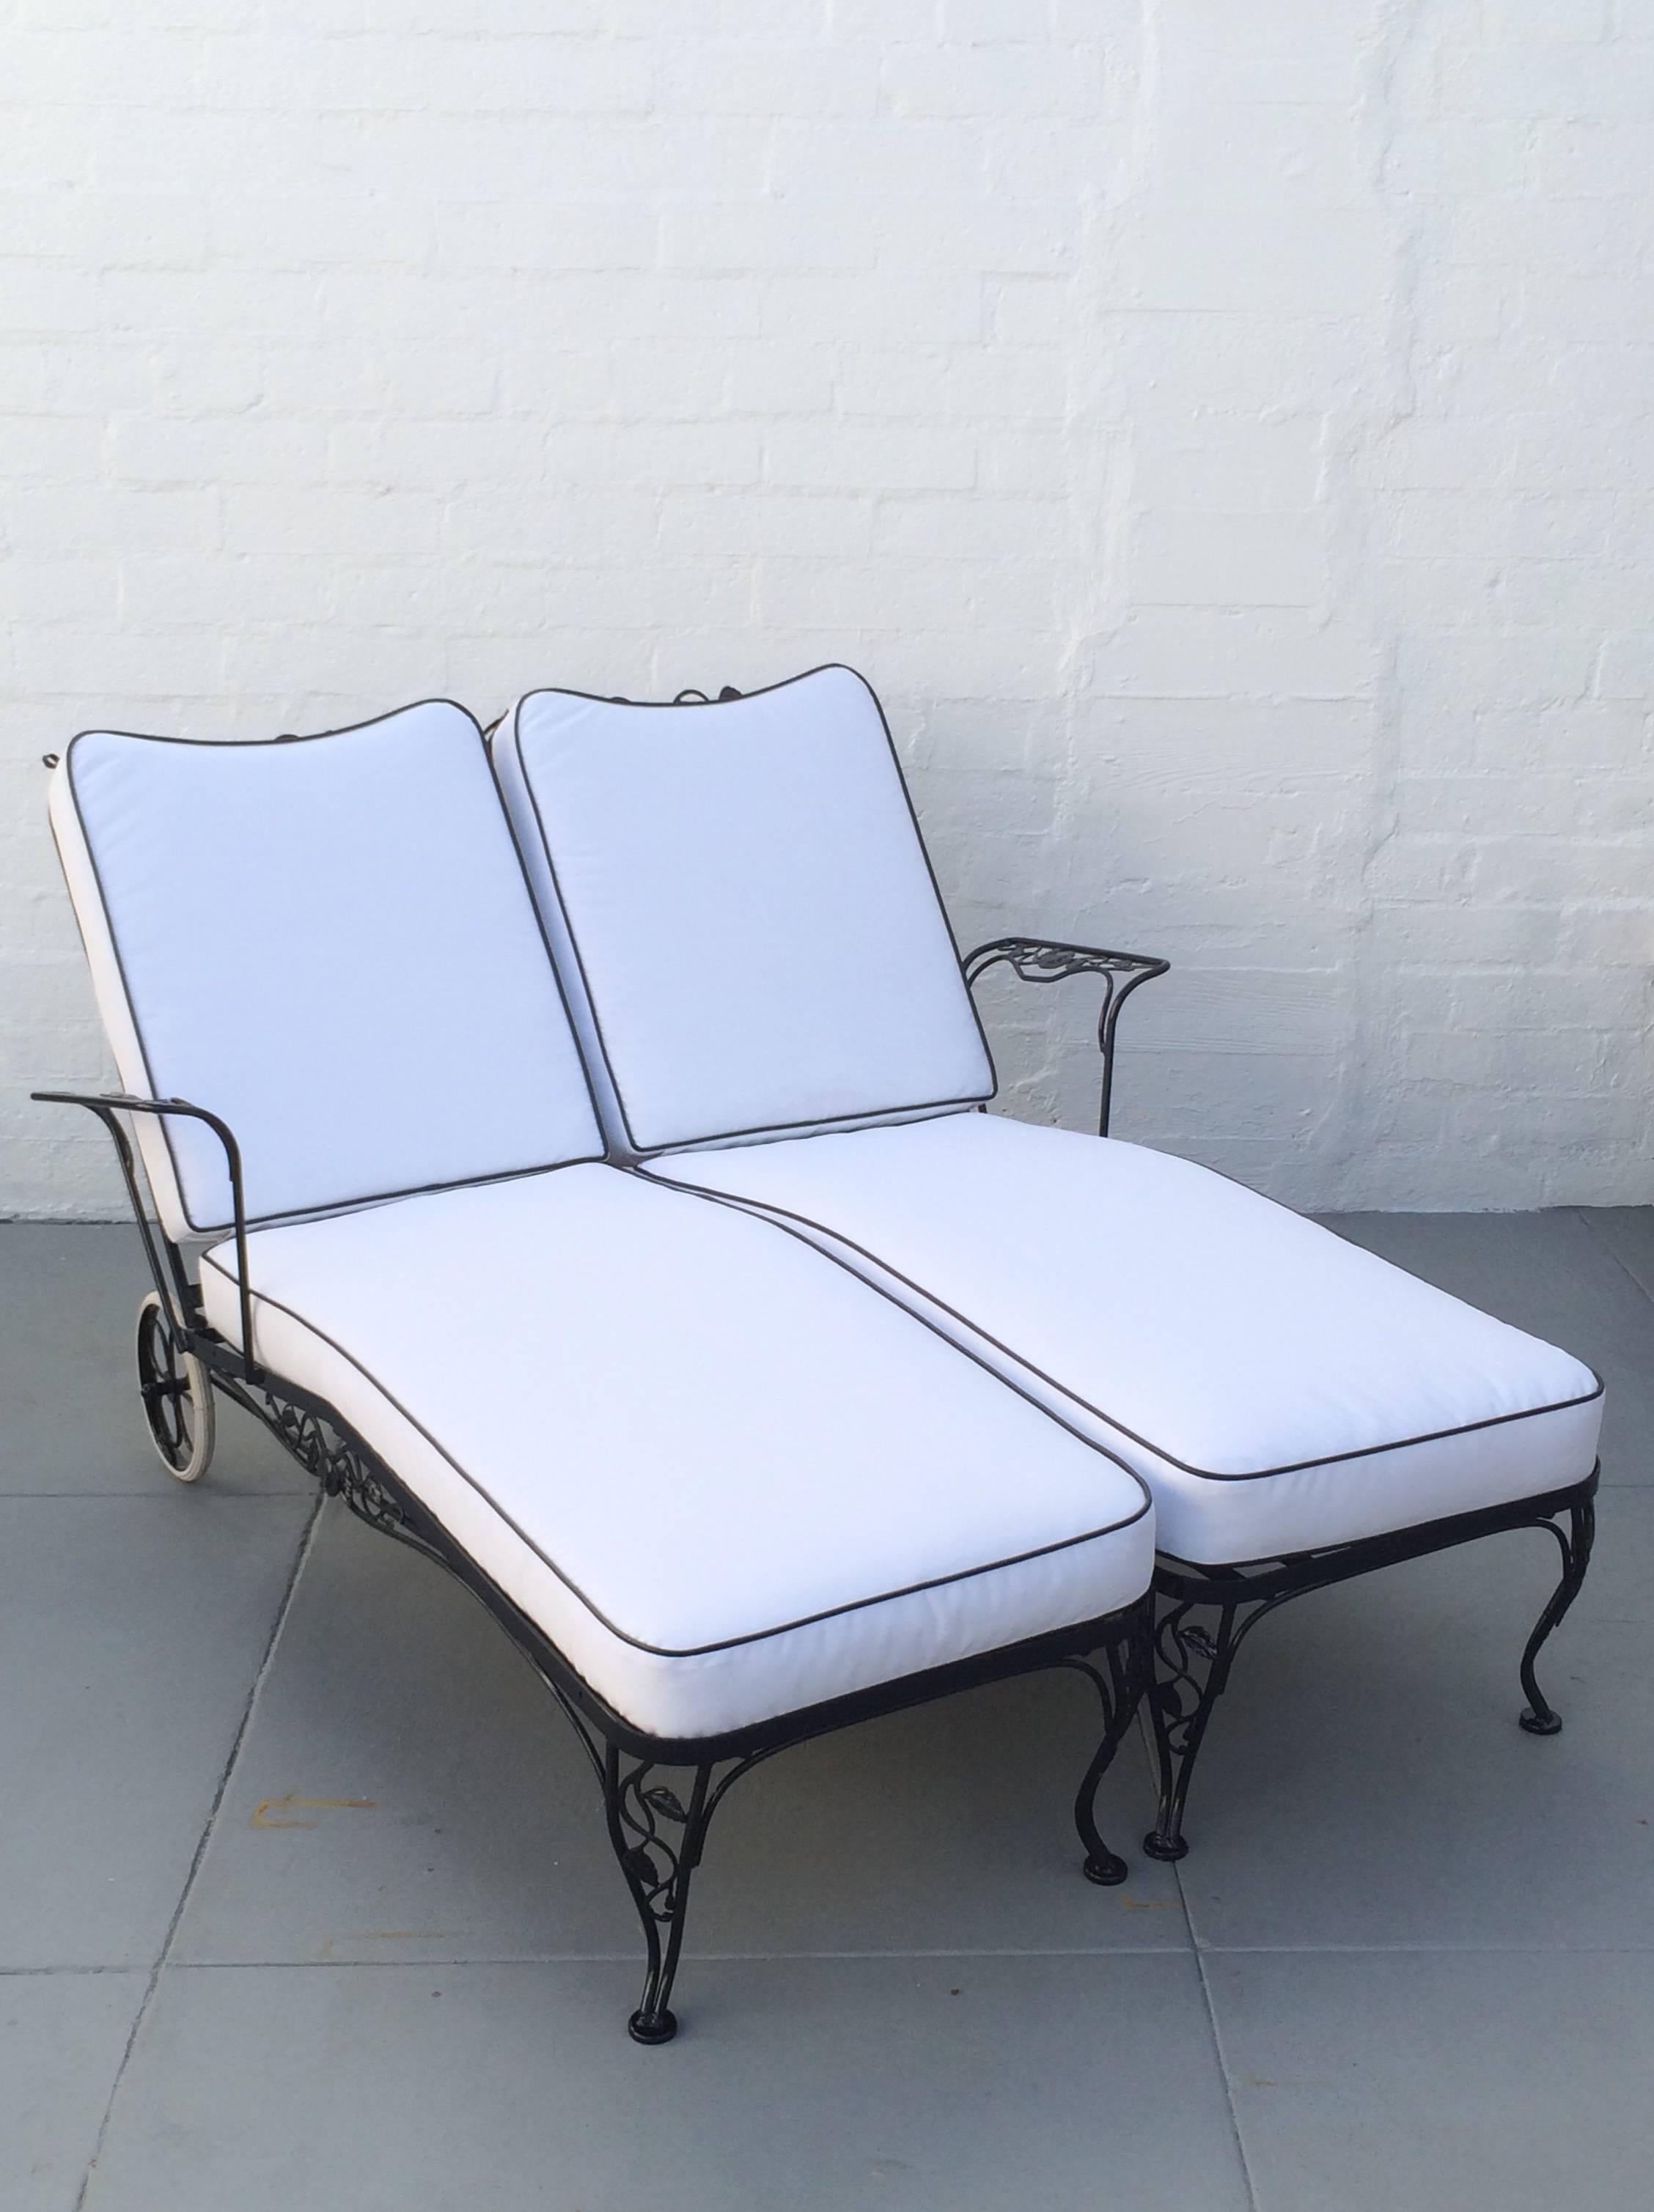 Newly powder-coated in black 1950s wrought iron lounge chaise for two designed by Russell Woodard. 
Designed to be side by side, but can be moved apart. 
Each lounge has an adjustable back for maximum comfort. 
All new cushions covered in a white